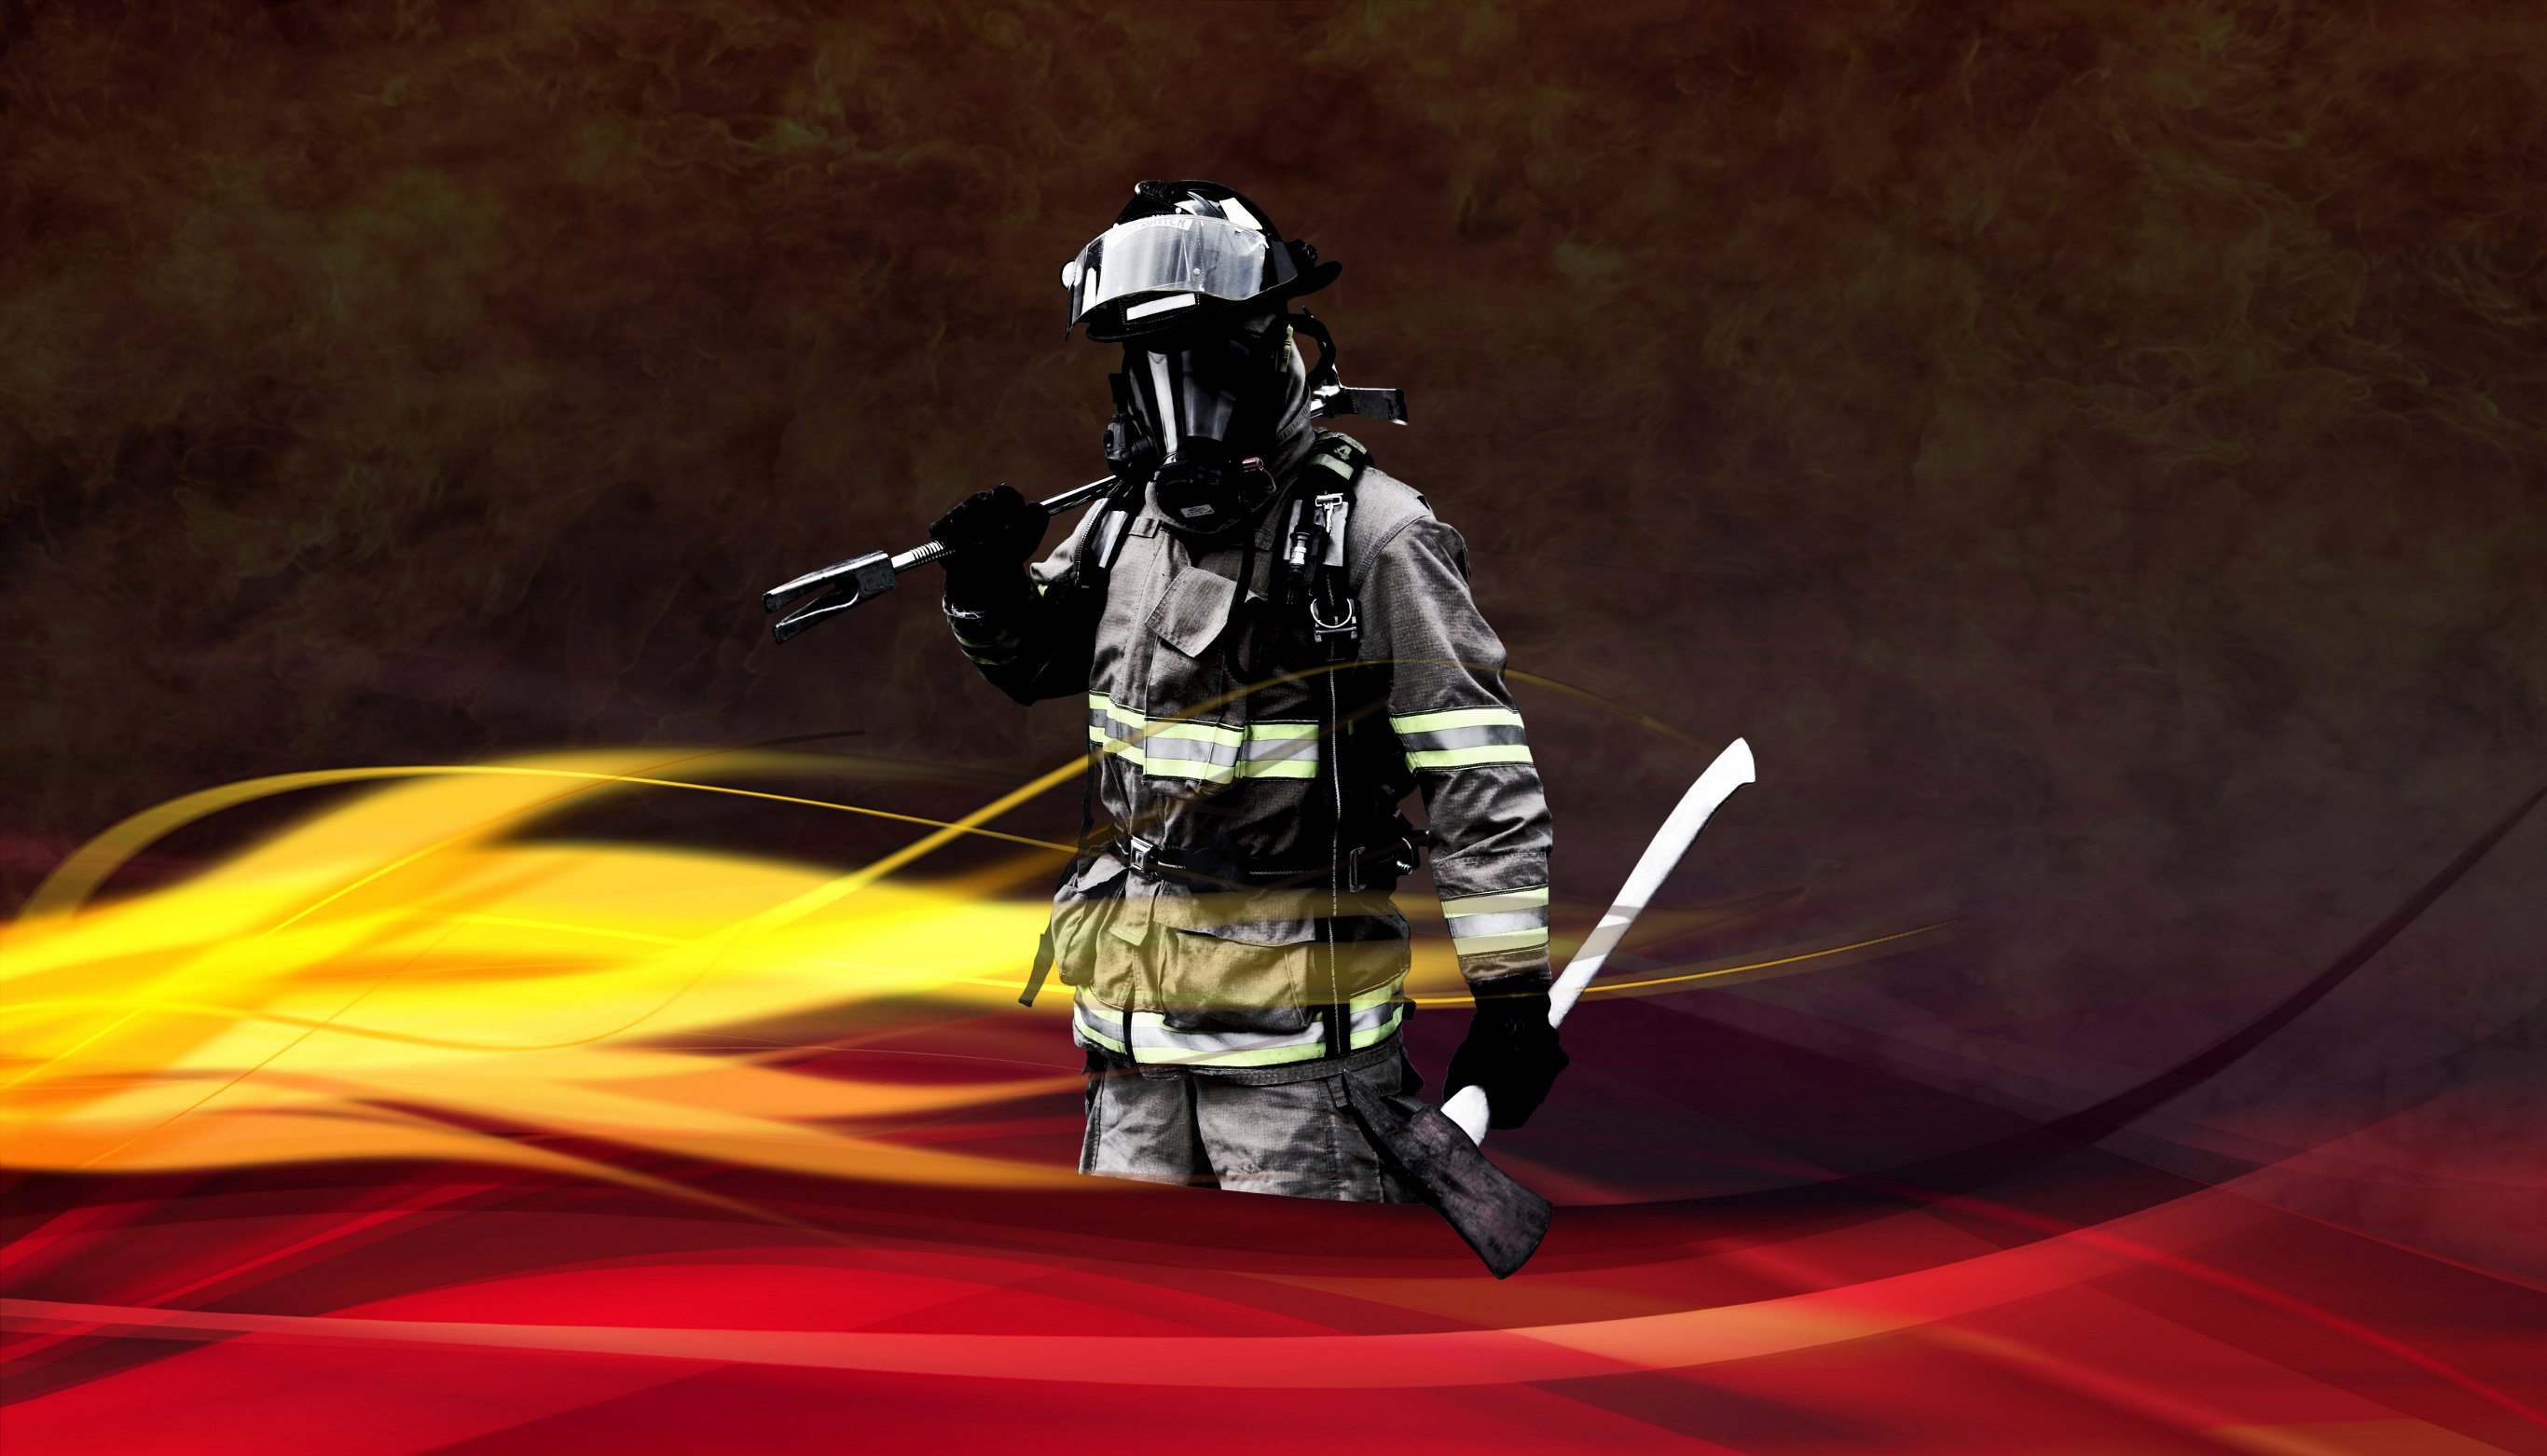 Firefighter wallpaper by whiskeycoke on